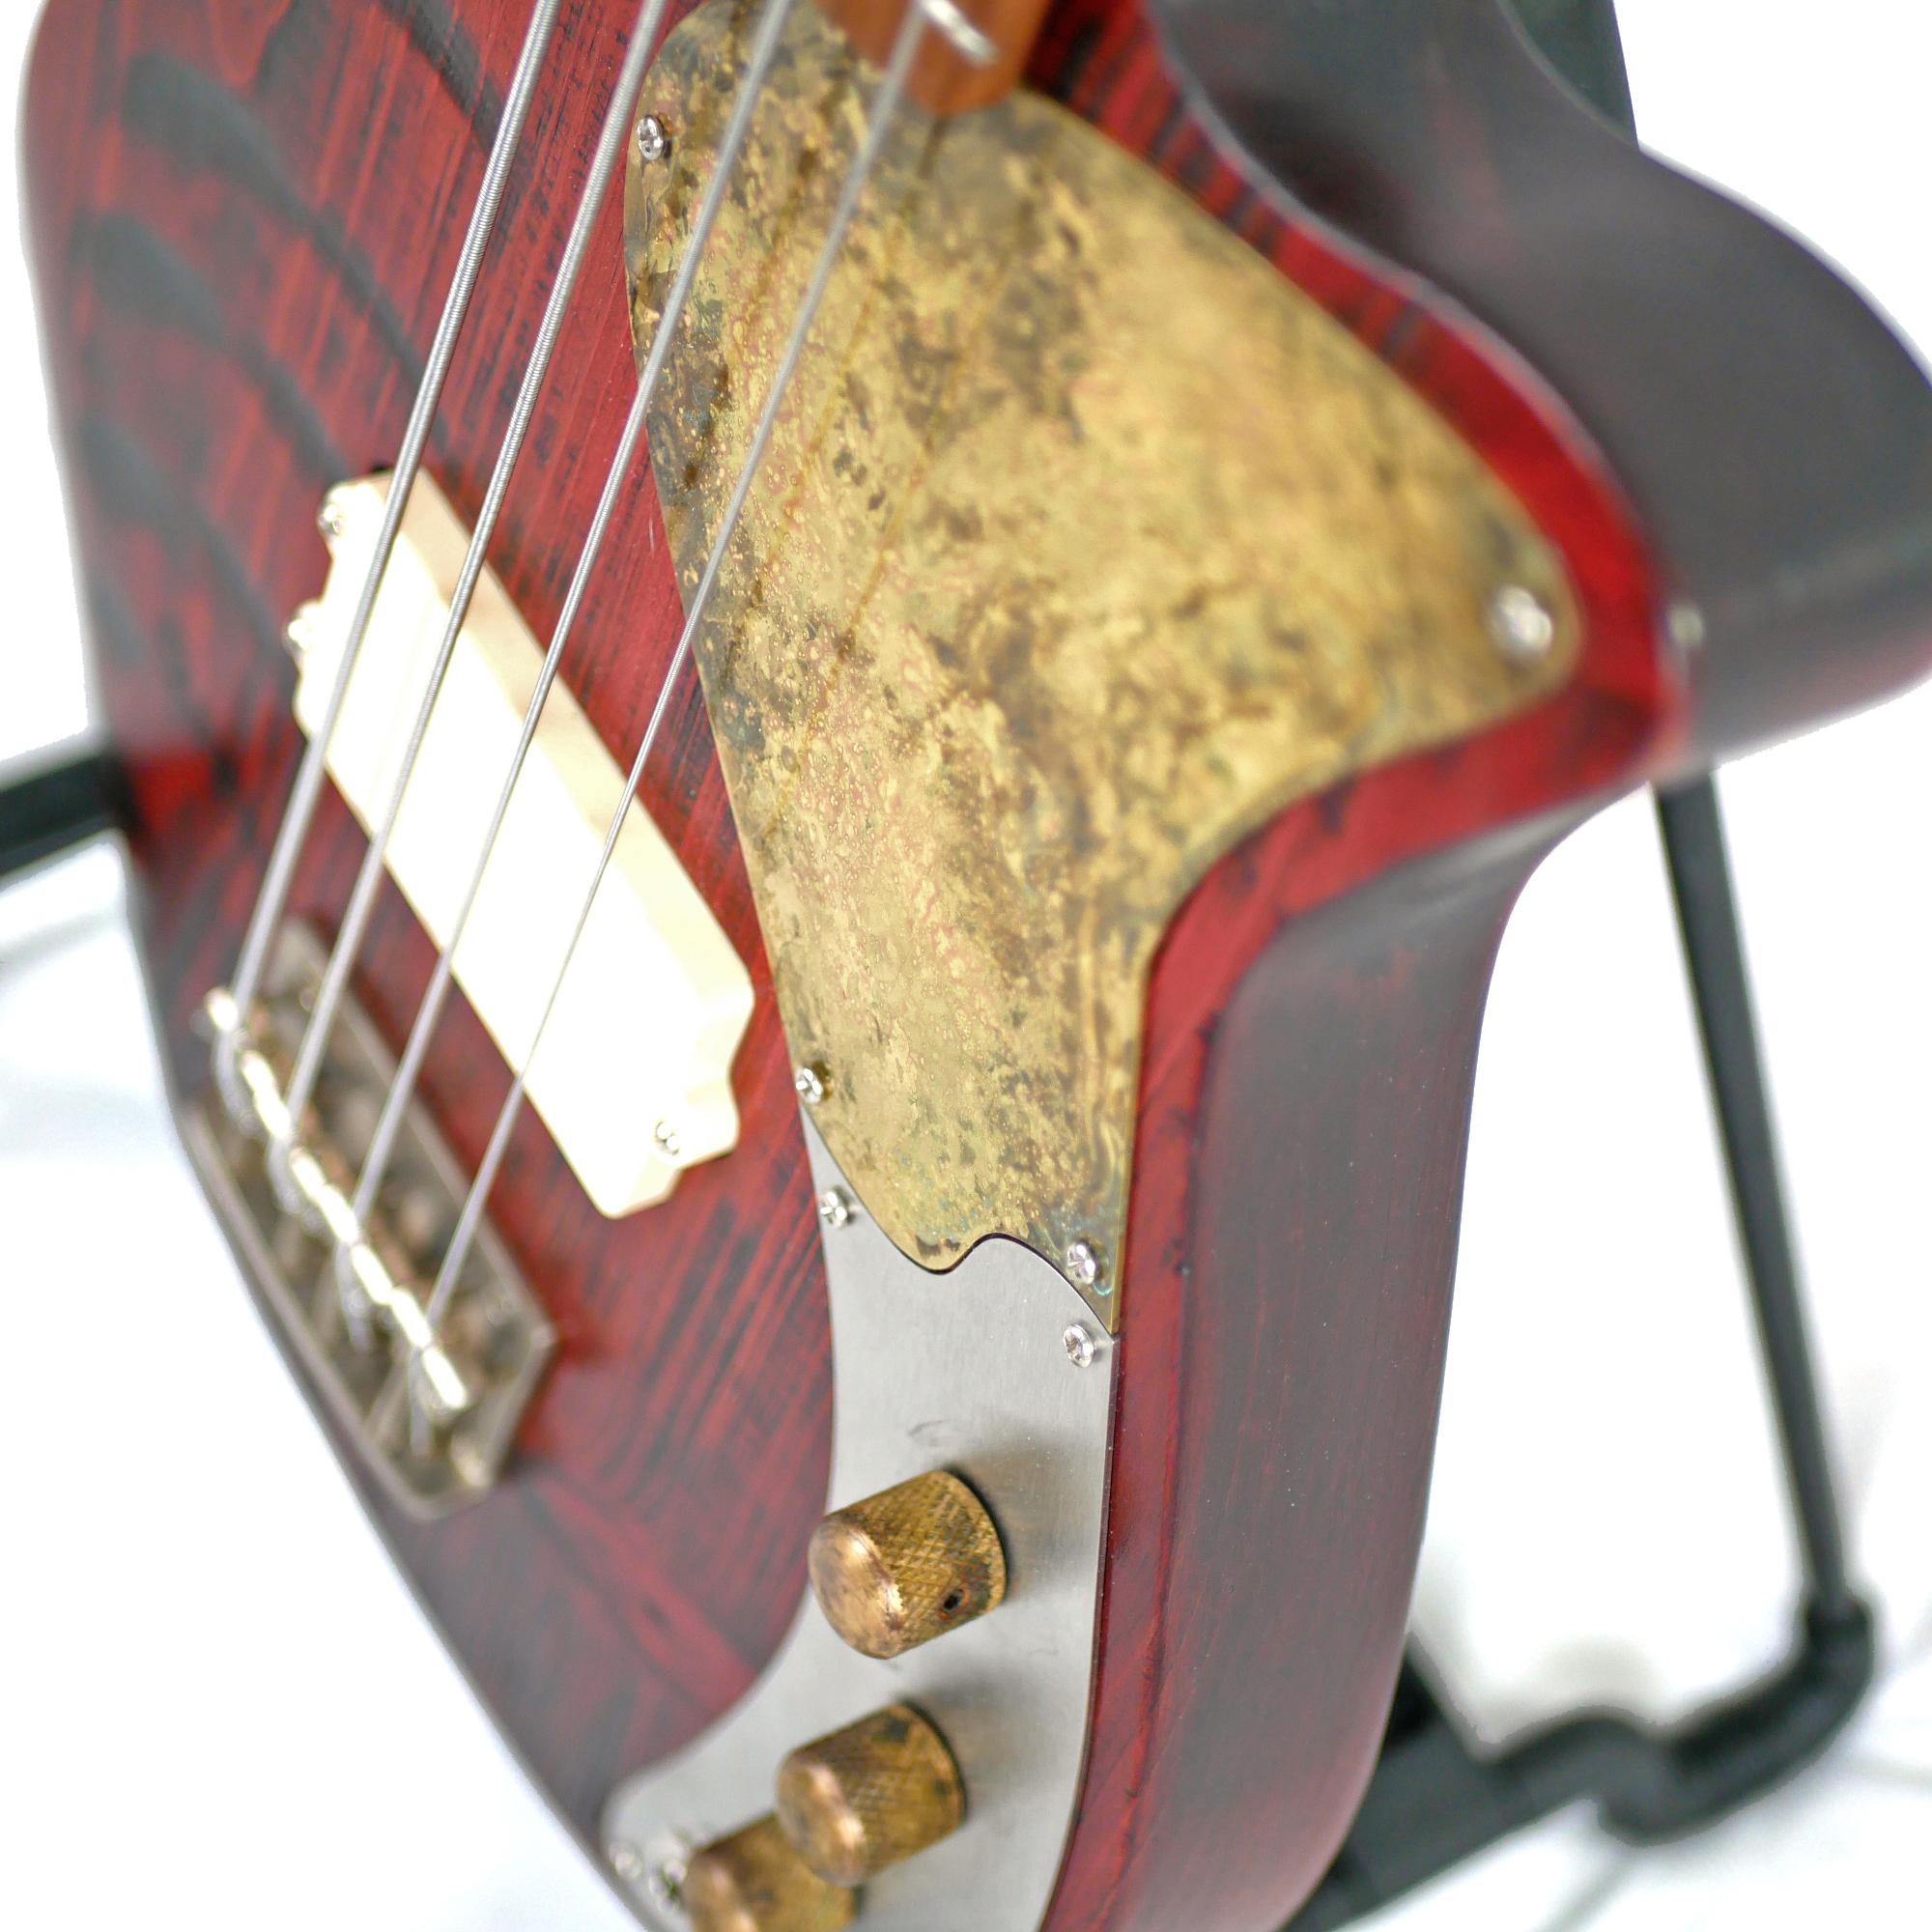 Marilyn MM 32" Medium-Scale Bass in Dark Cherry on Distressed Pine with EMG MMCS Pickup